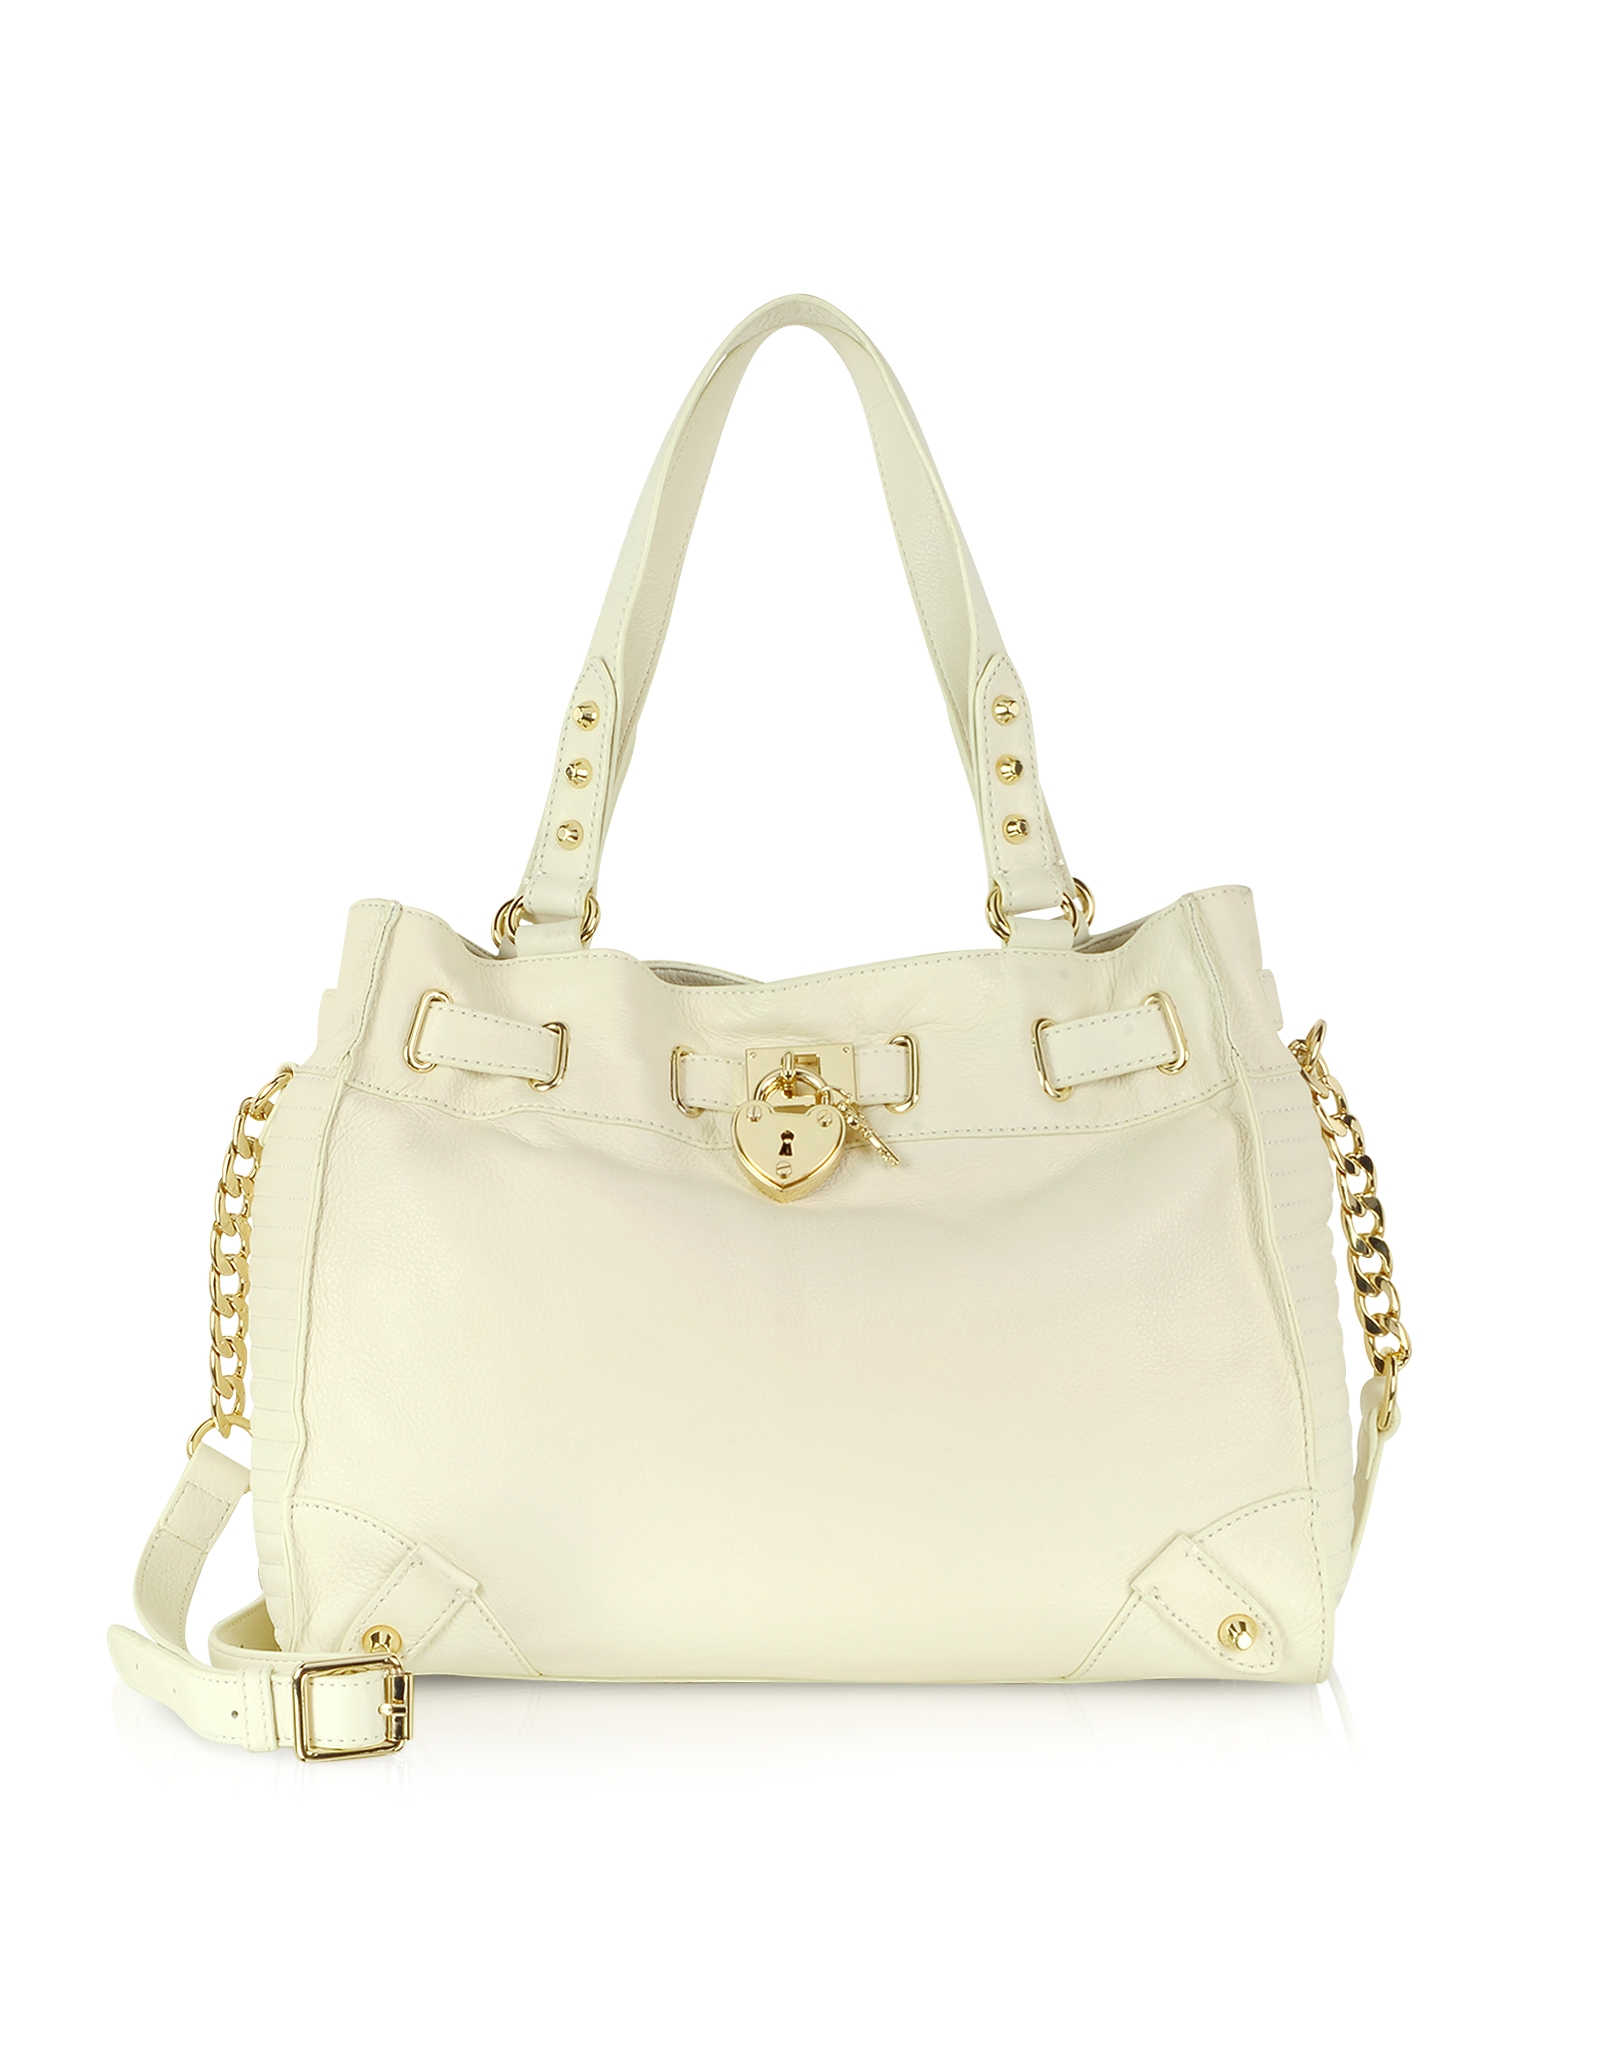 Juicy Couture Robertson Leather Daydreamer Tote in Beige (Ivory) | Lyst